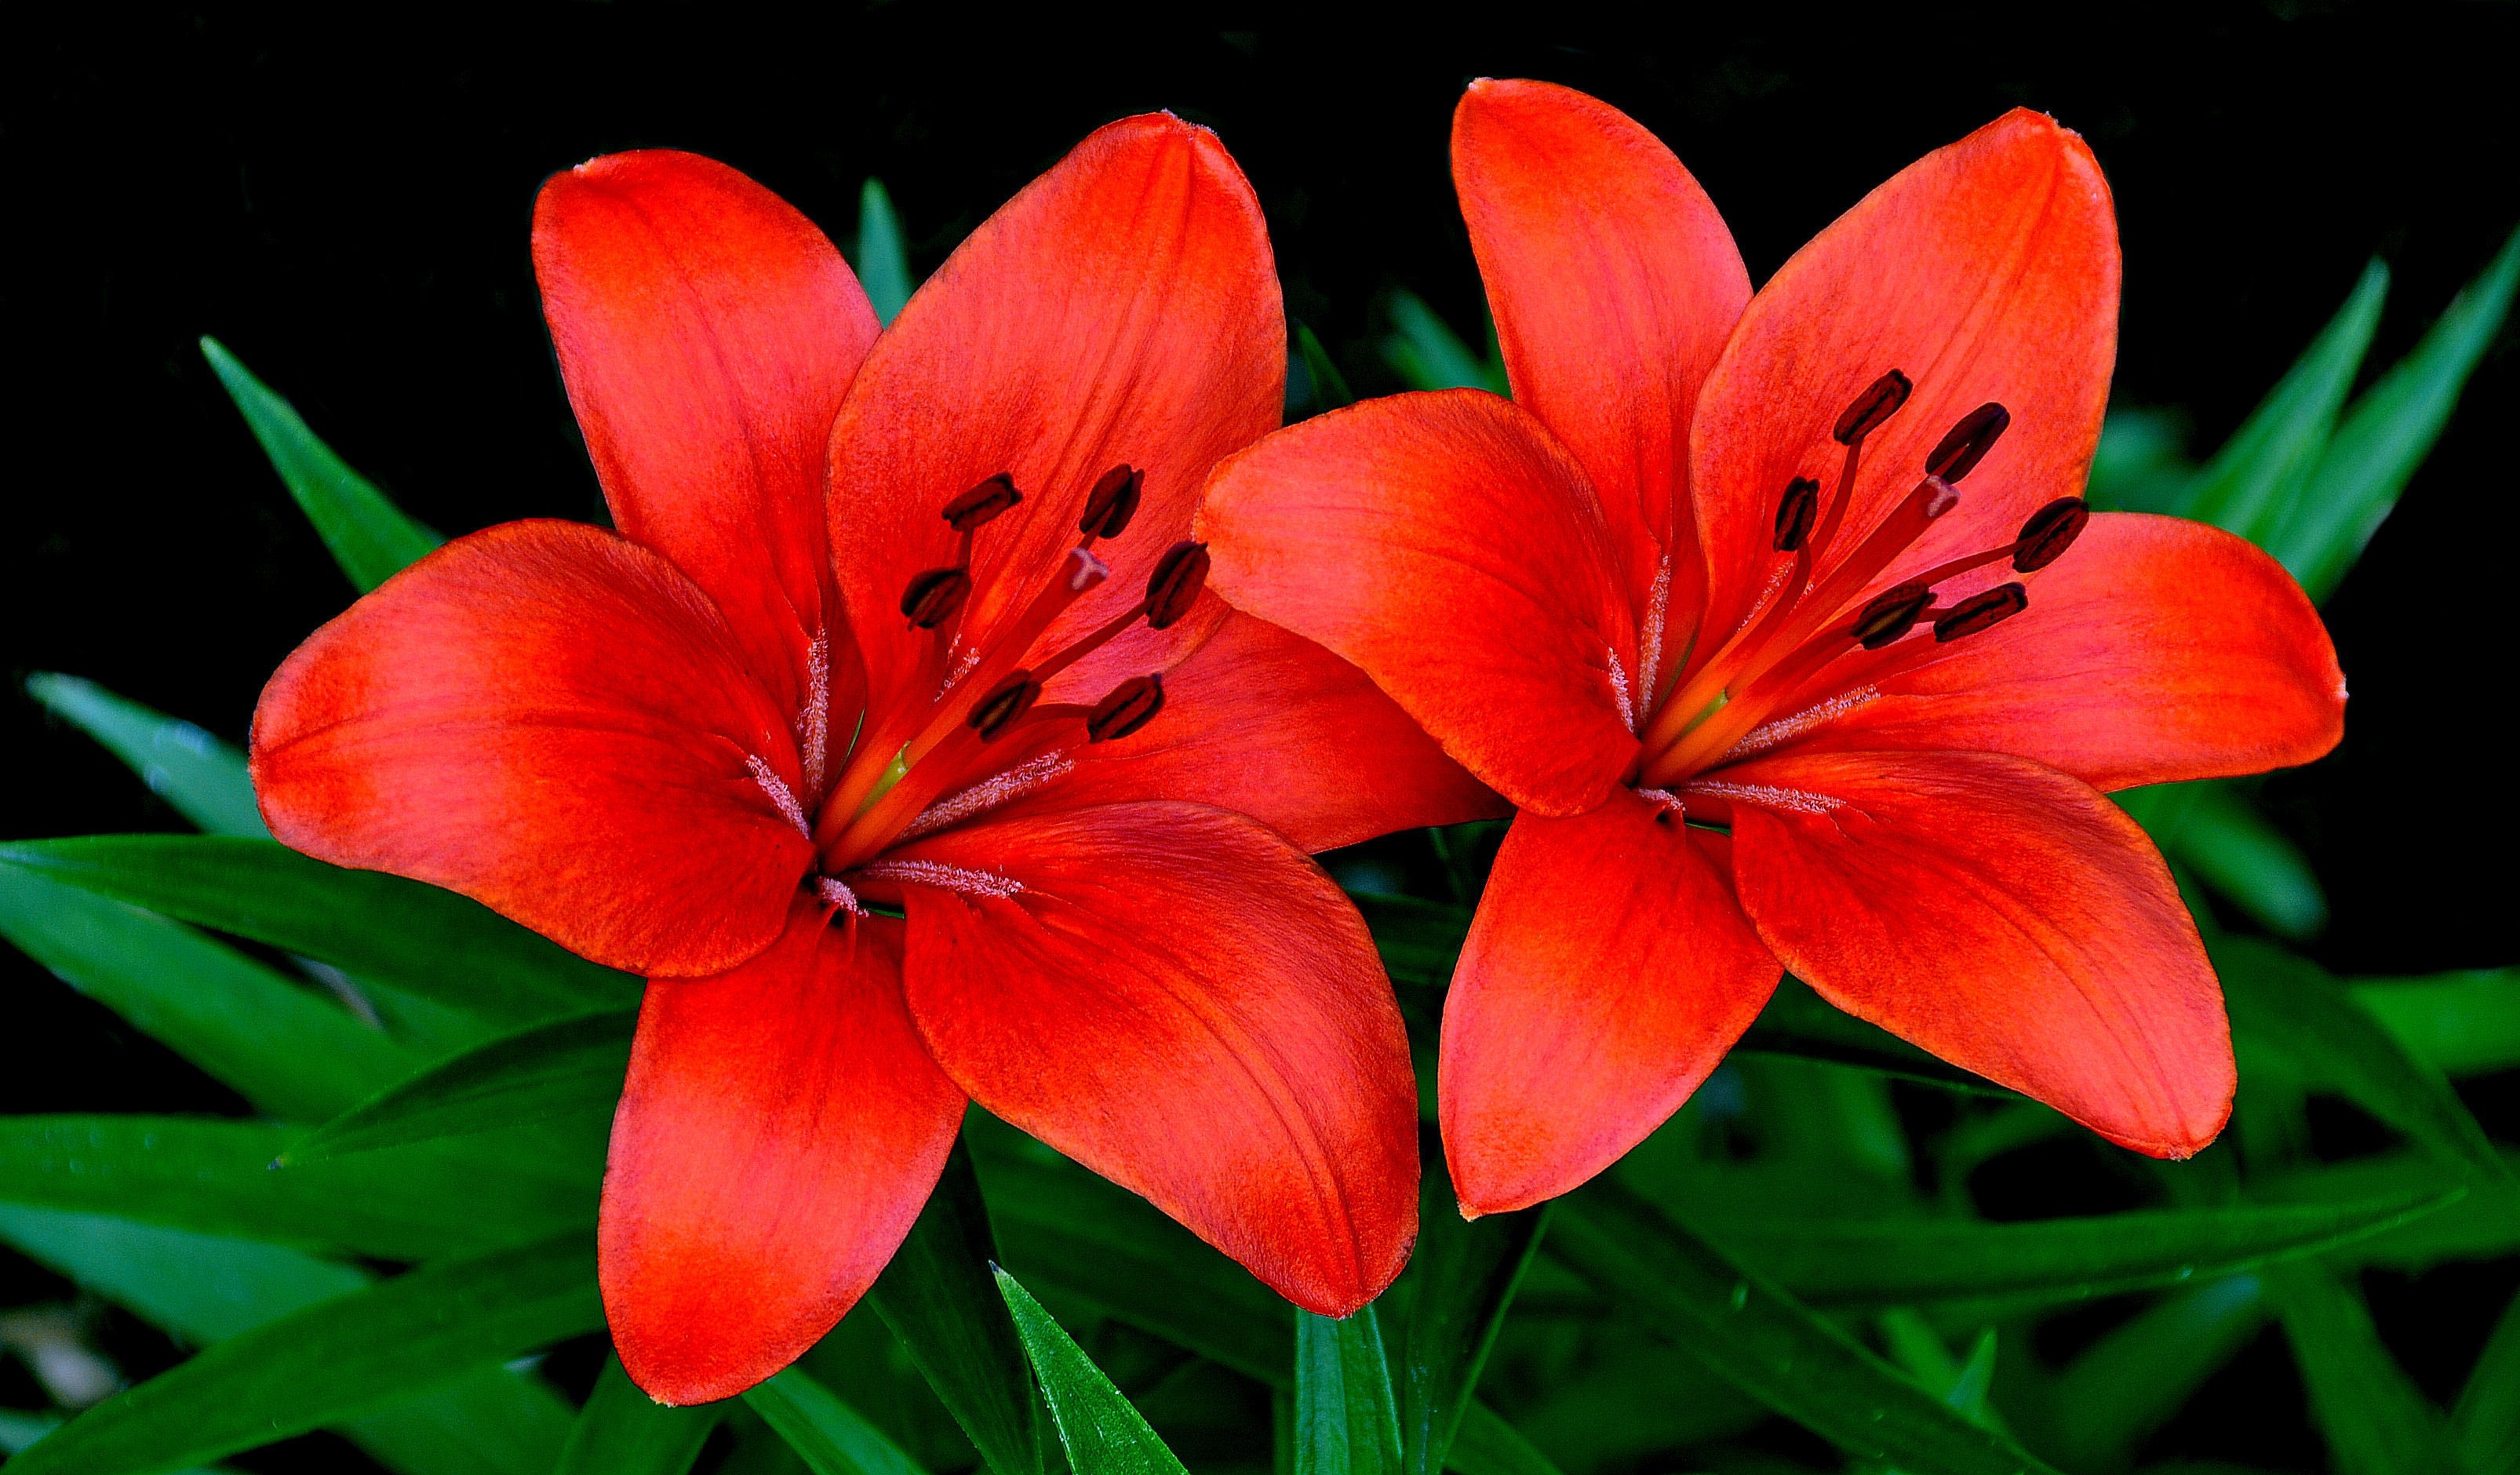 127544 download wallpaper flowers, lilies, petals, couple, pair screensavers and pictures for free